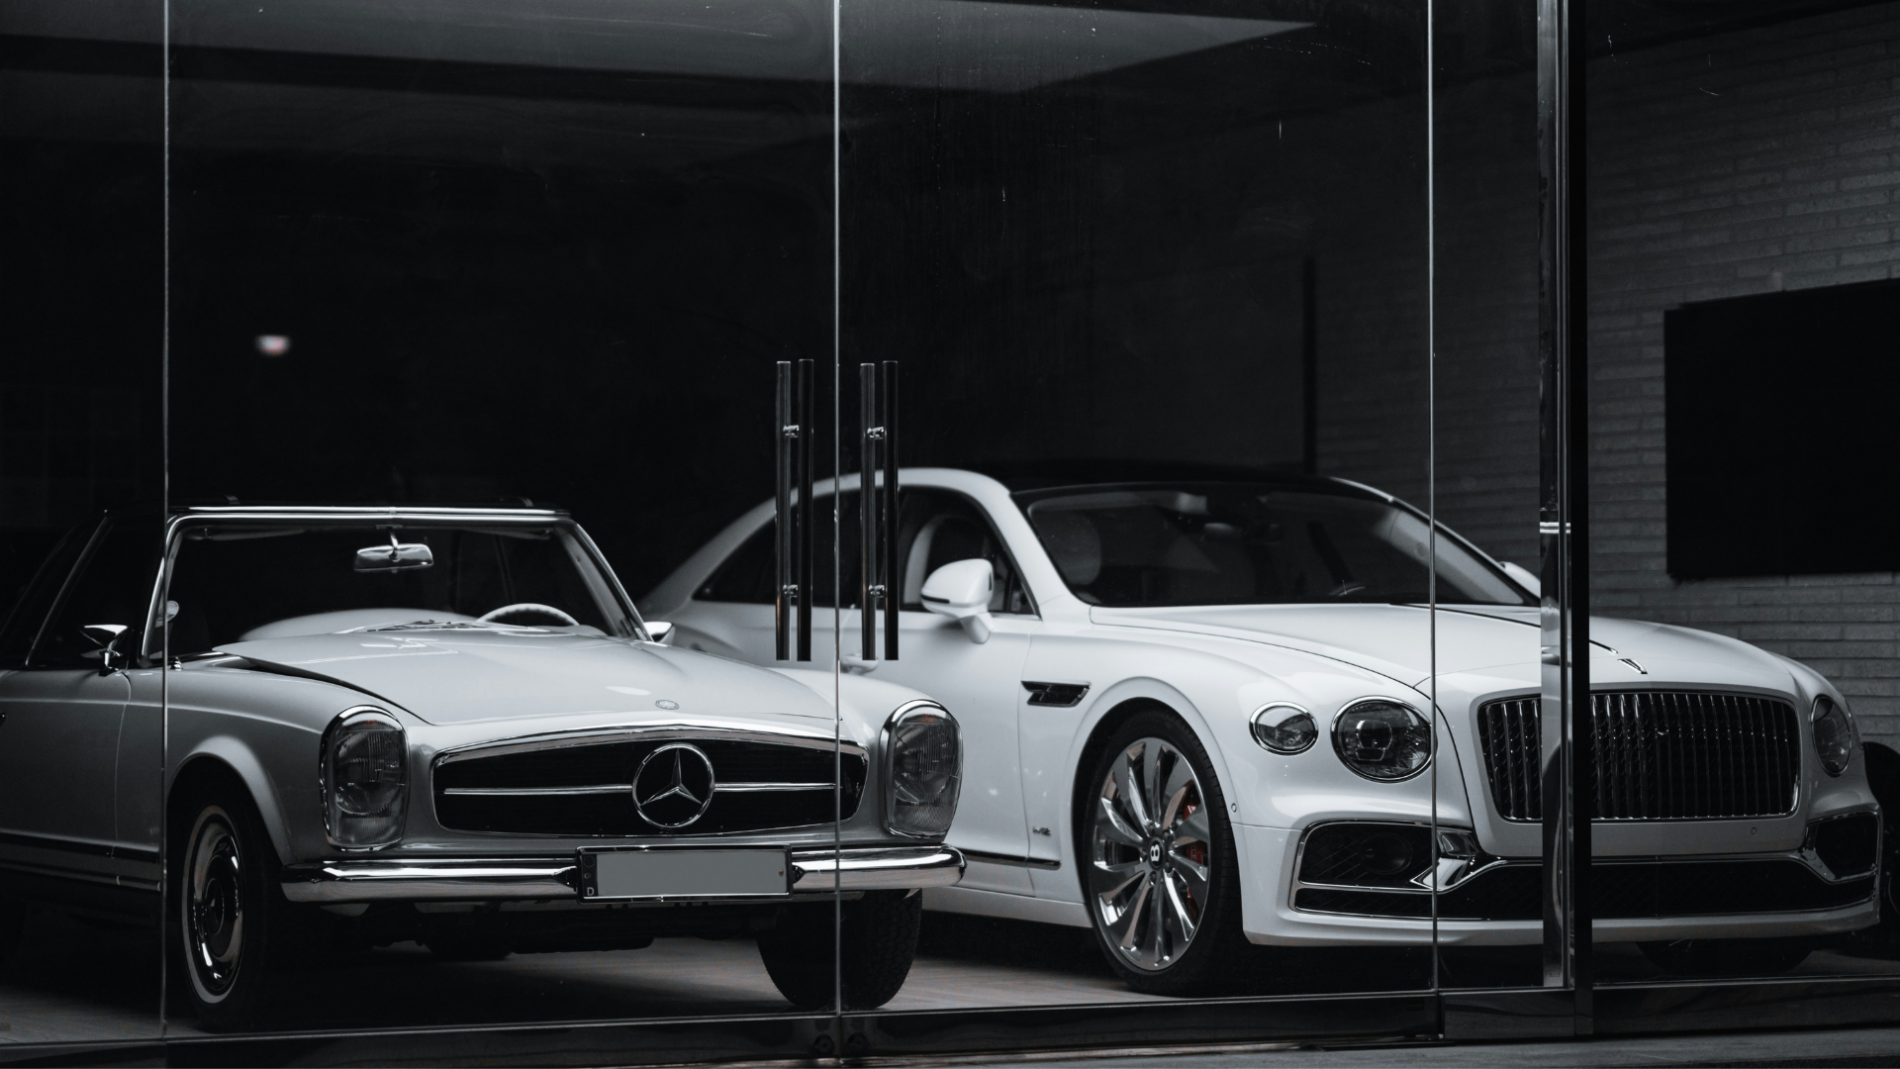 A classic and modern luxury side by side: vintage mercedes convertible meets contemporary bentley sedan in a sleek showroom.